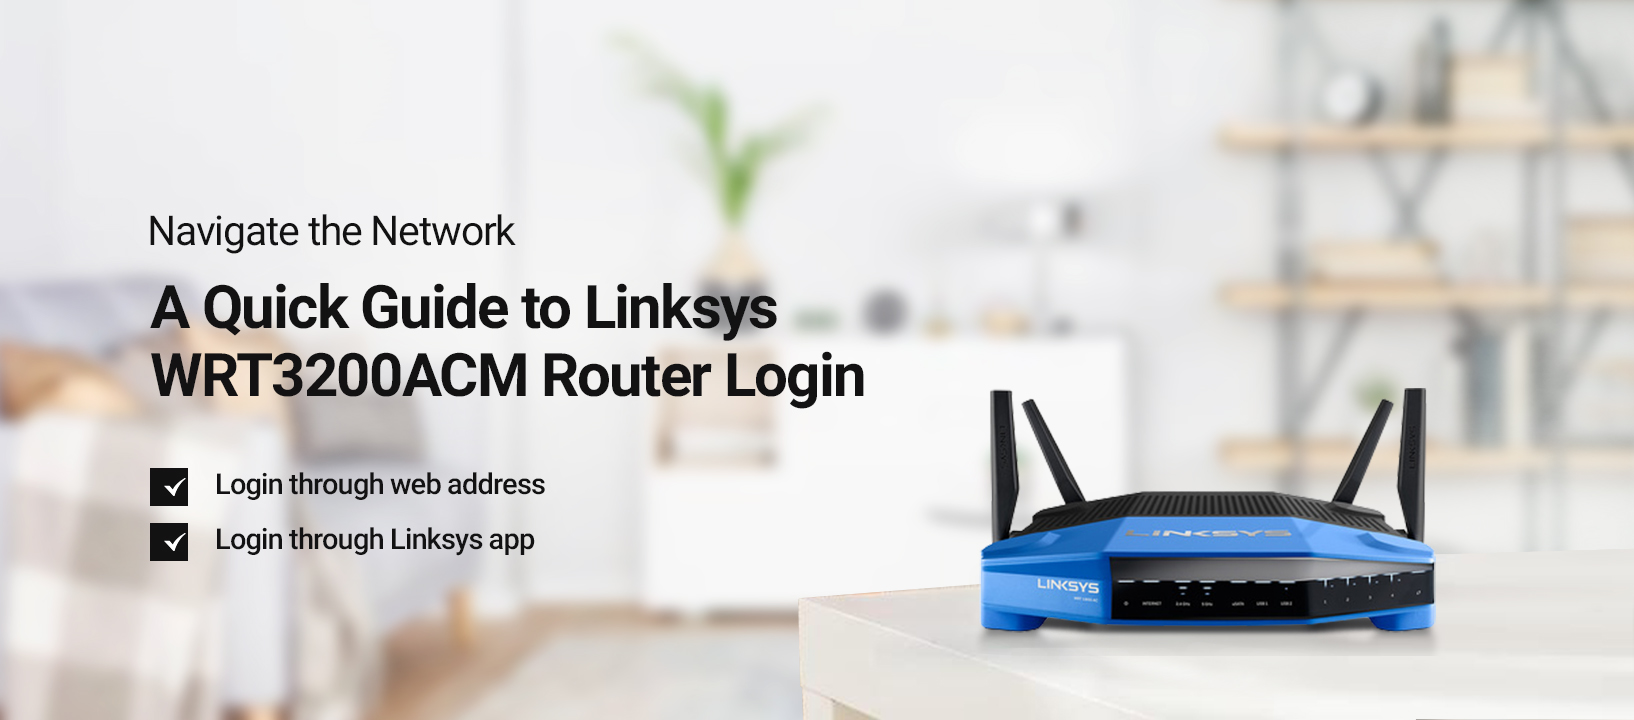 A Brief Guide to Linksys WRT3200ACM Router Login